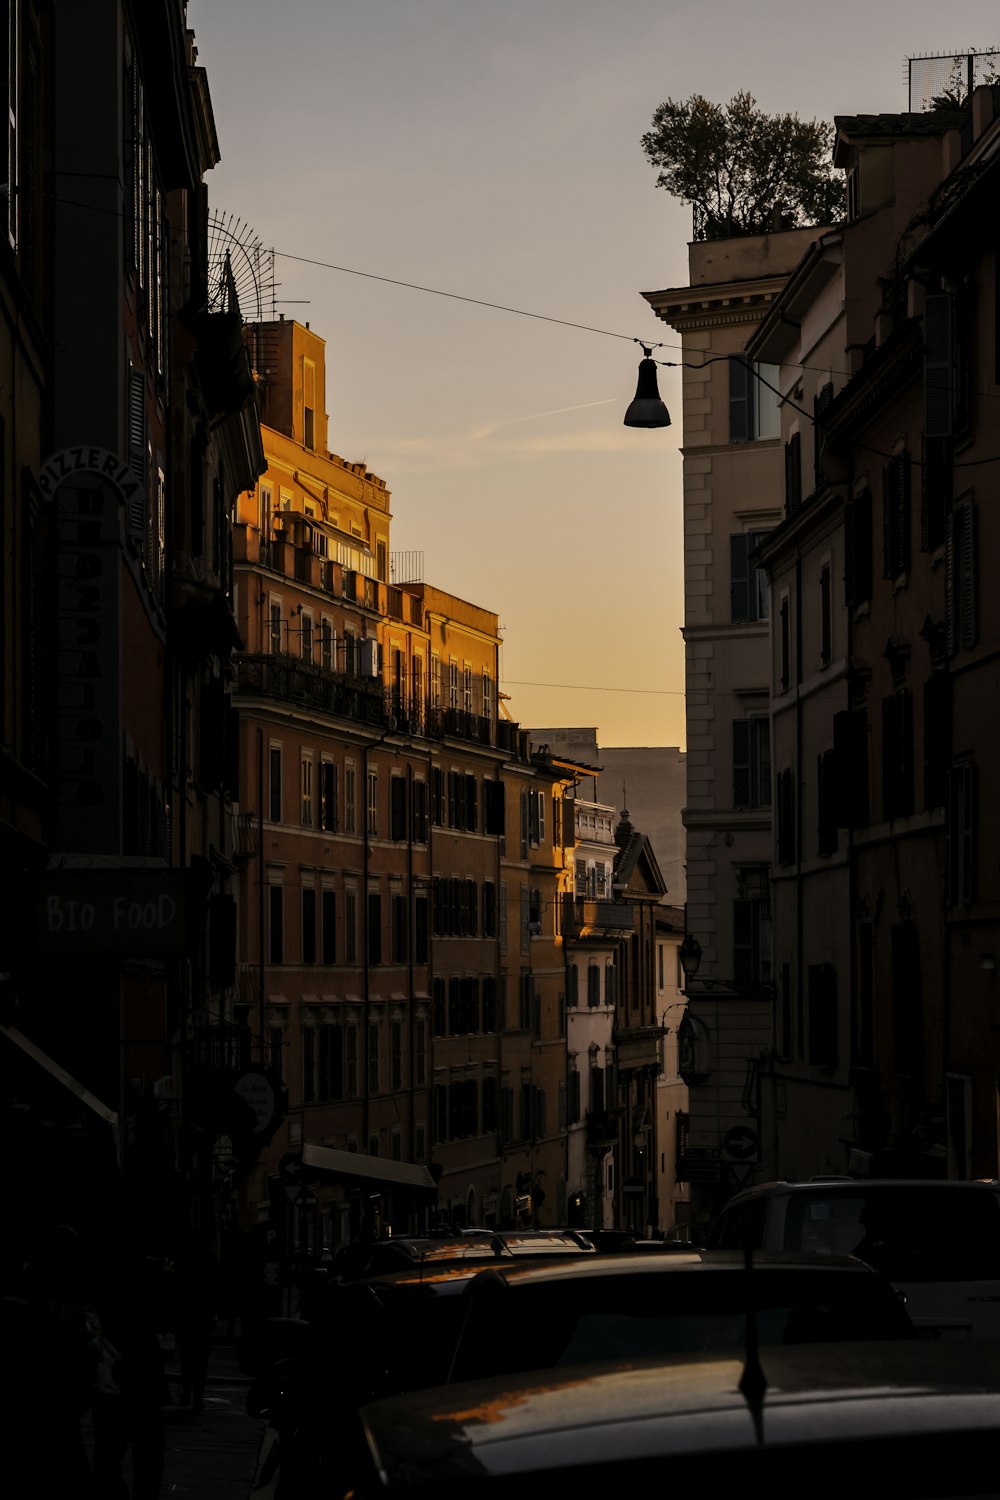 a view of a street in a city at sunset